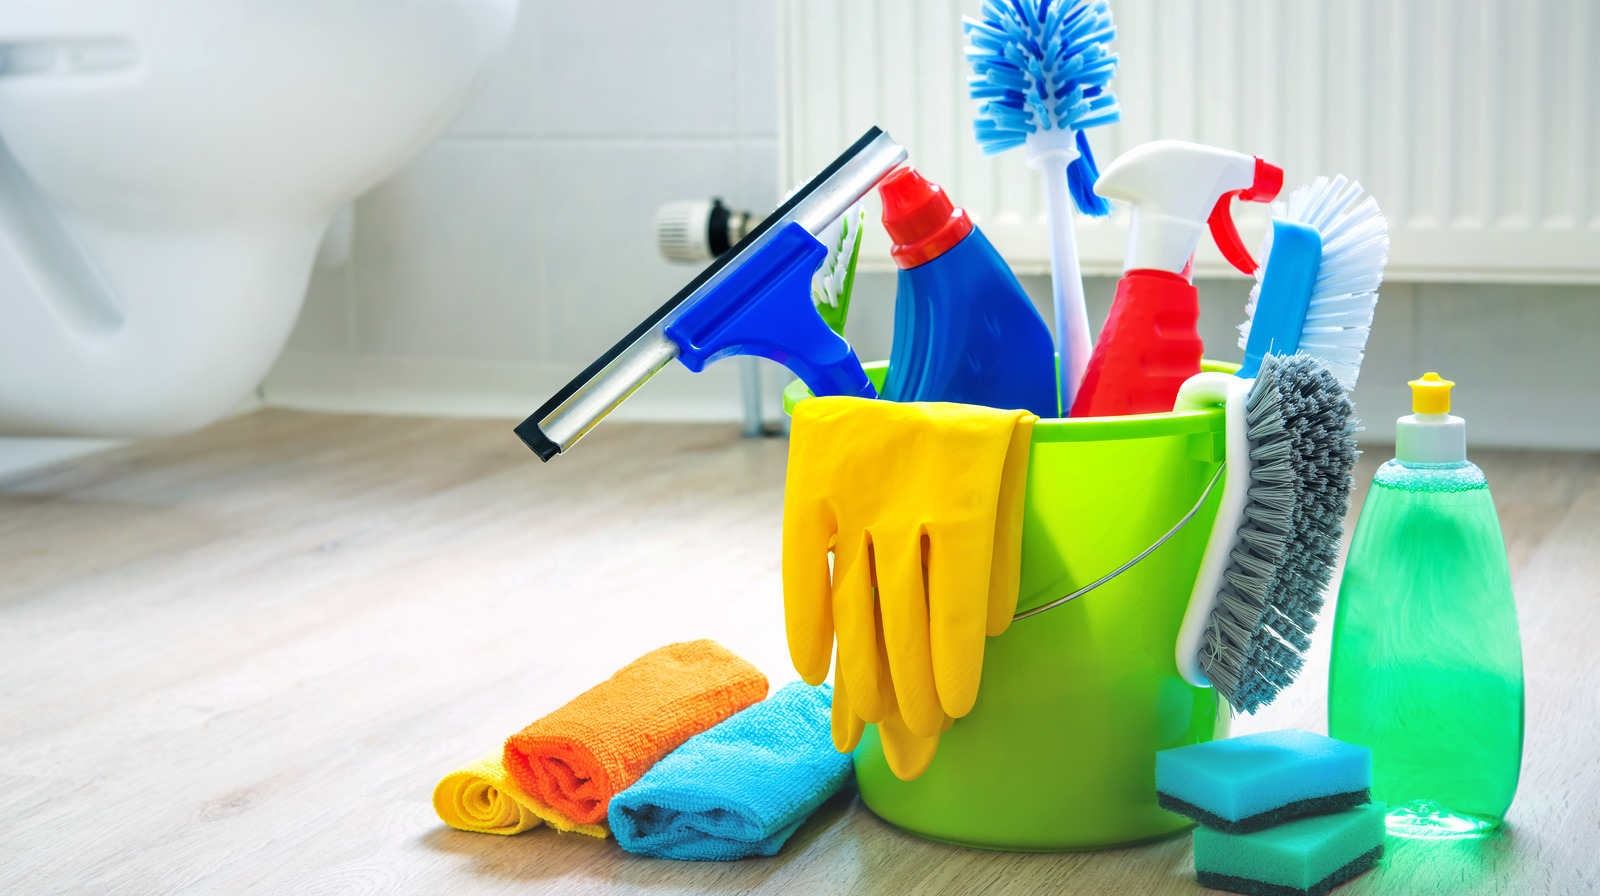 https://www.housedigest.com/img/gallery/how-should-you-really-be-cleaning-your-cleaning-supplies/l-intro-1646686467.jpg